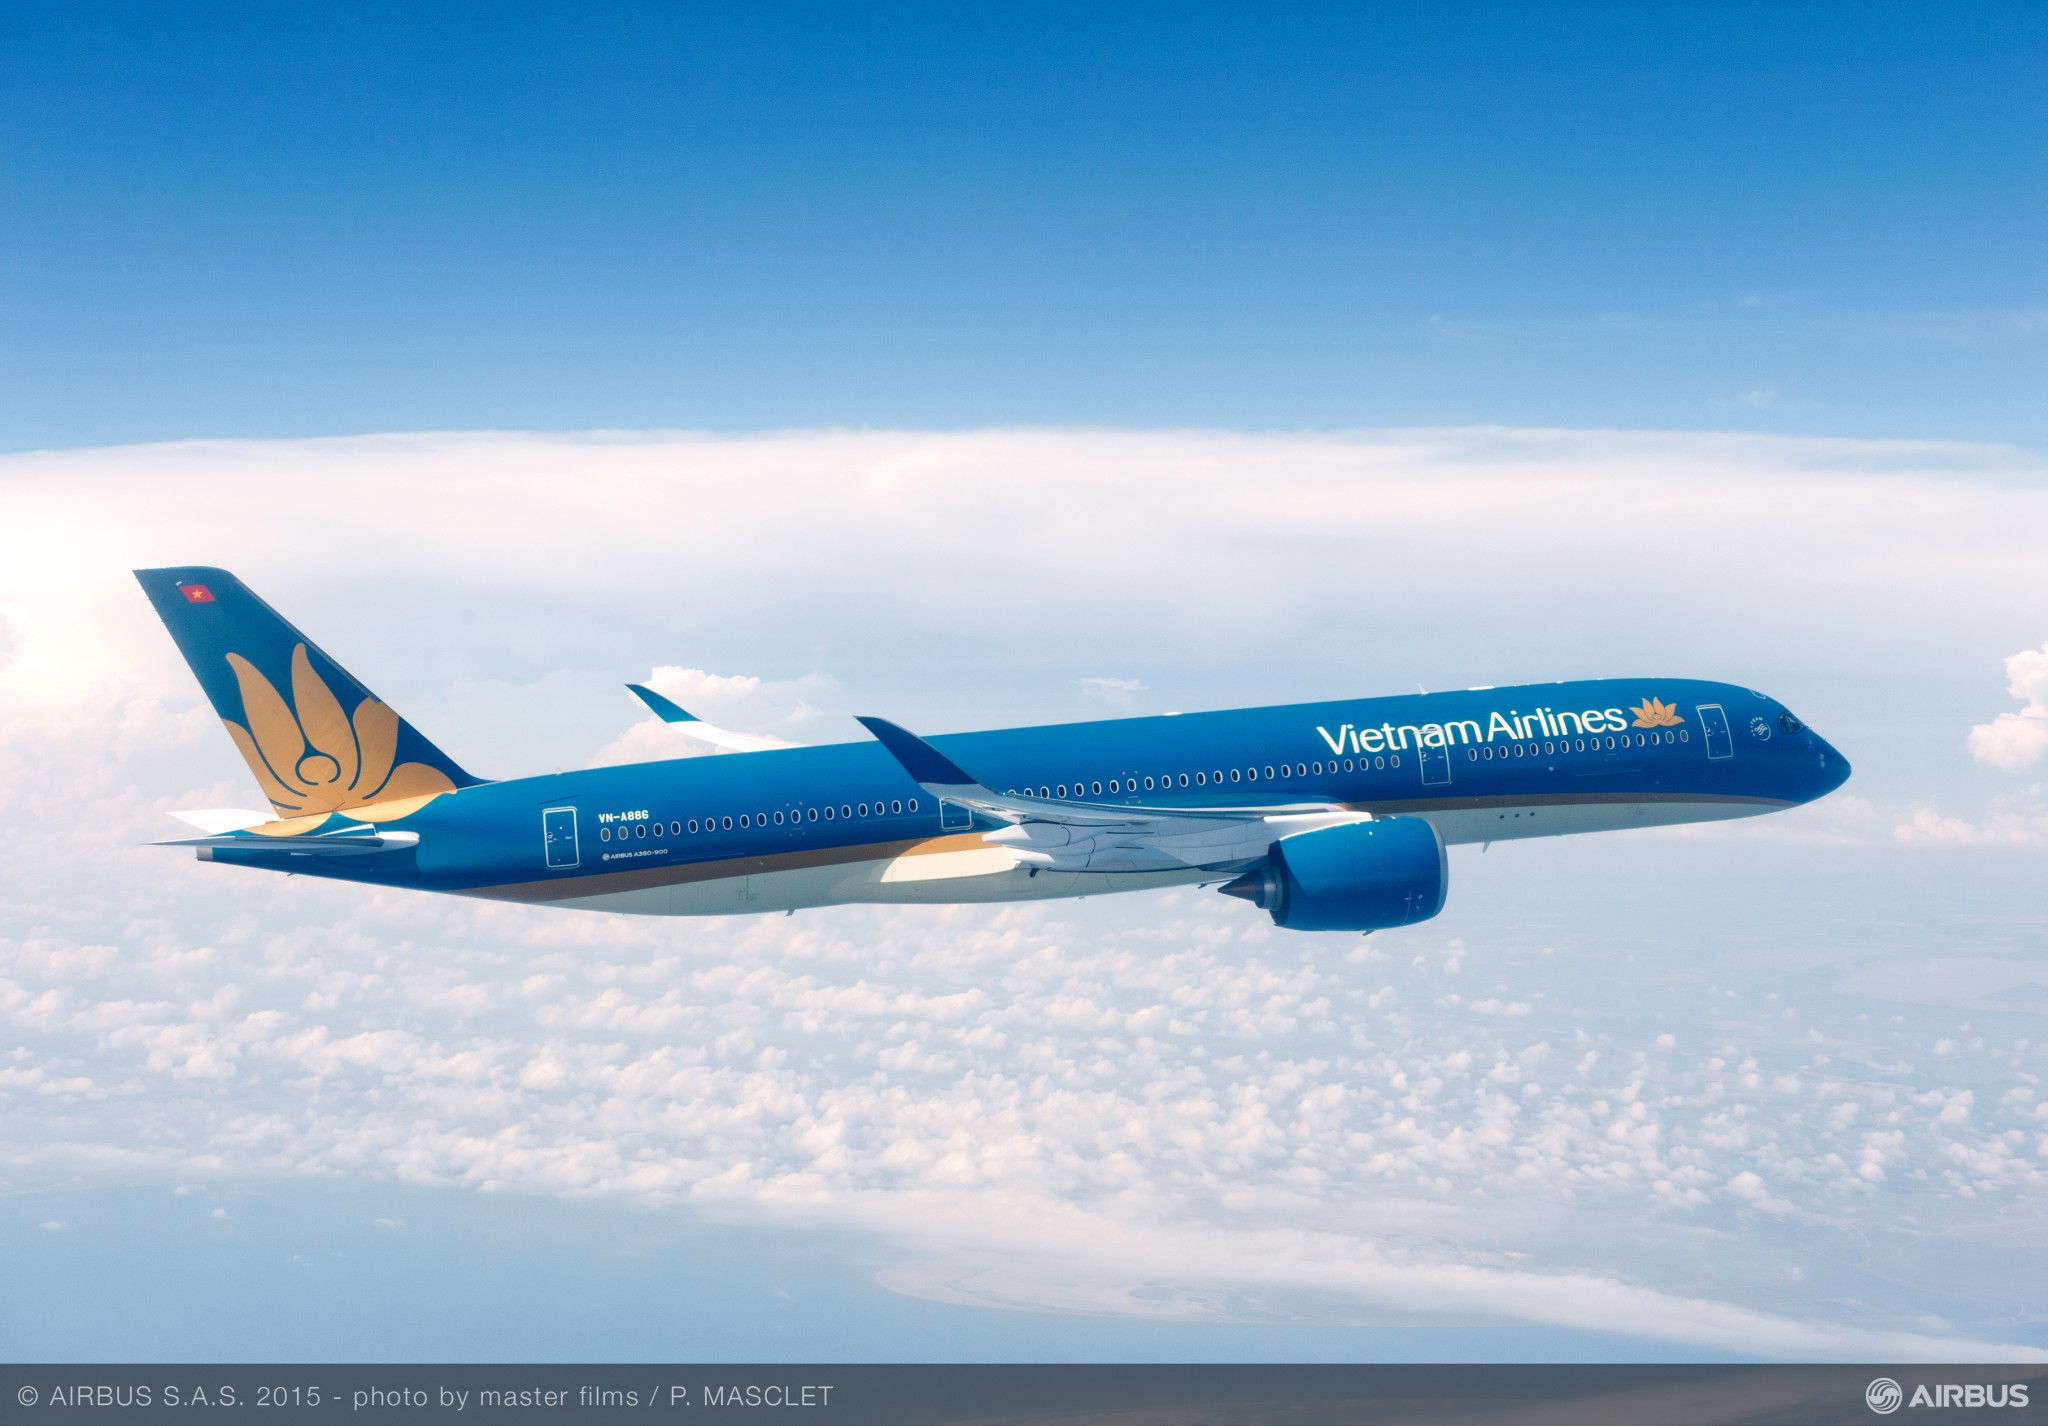 Vietnam Airlines signs MOU for 10 more A350-900s